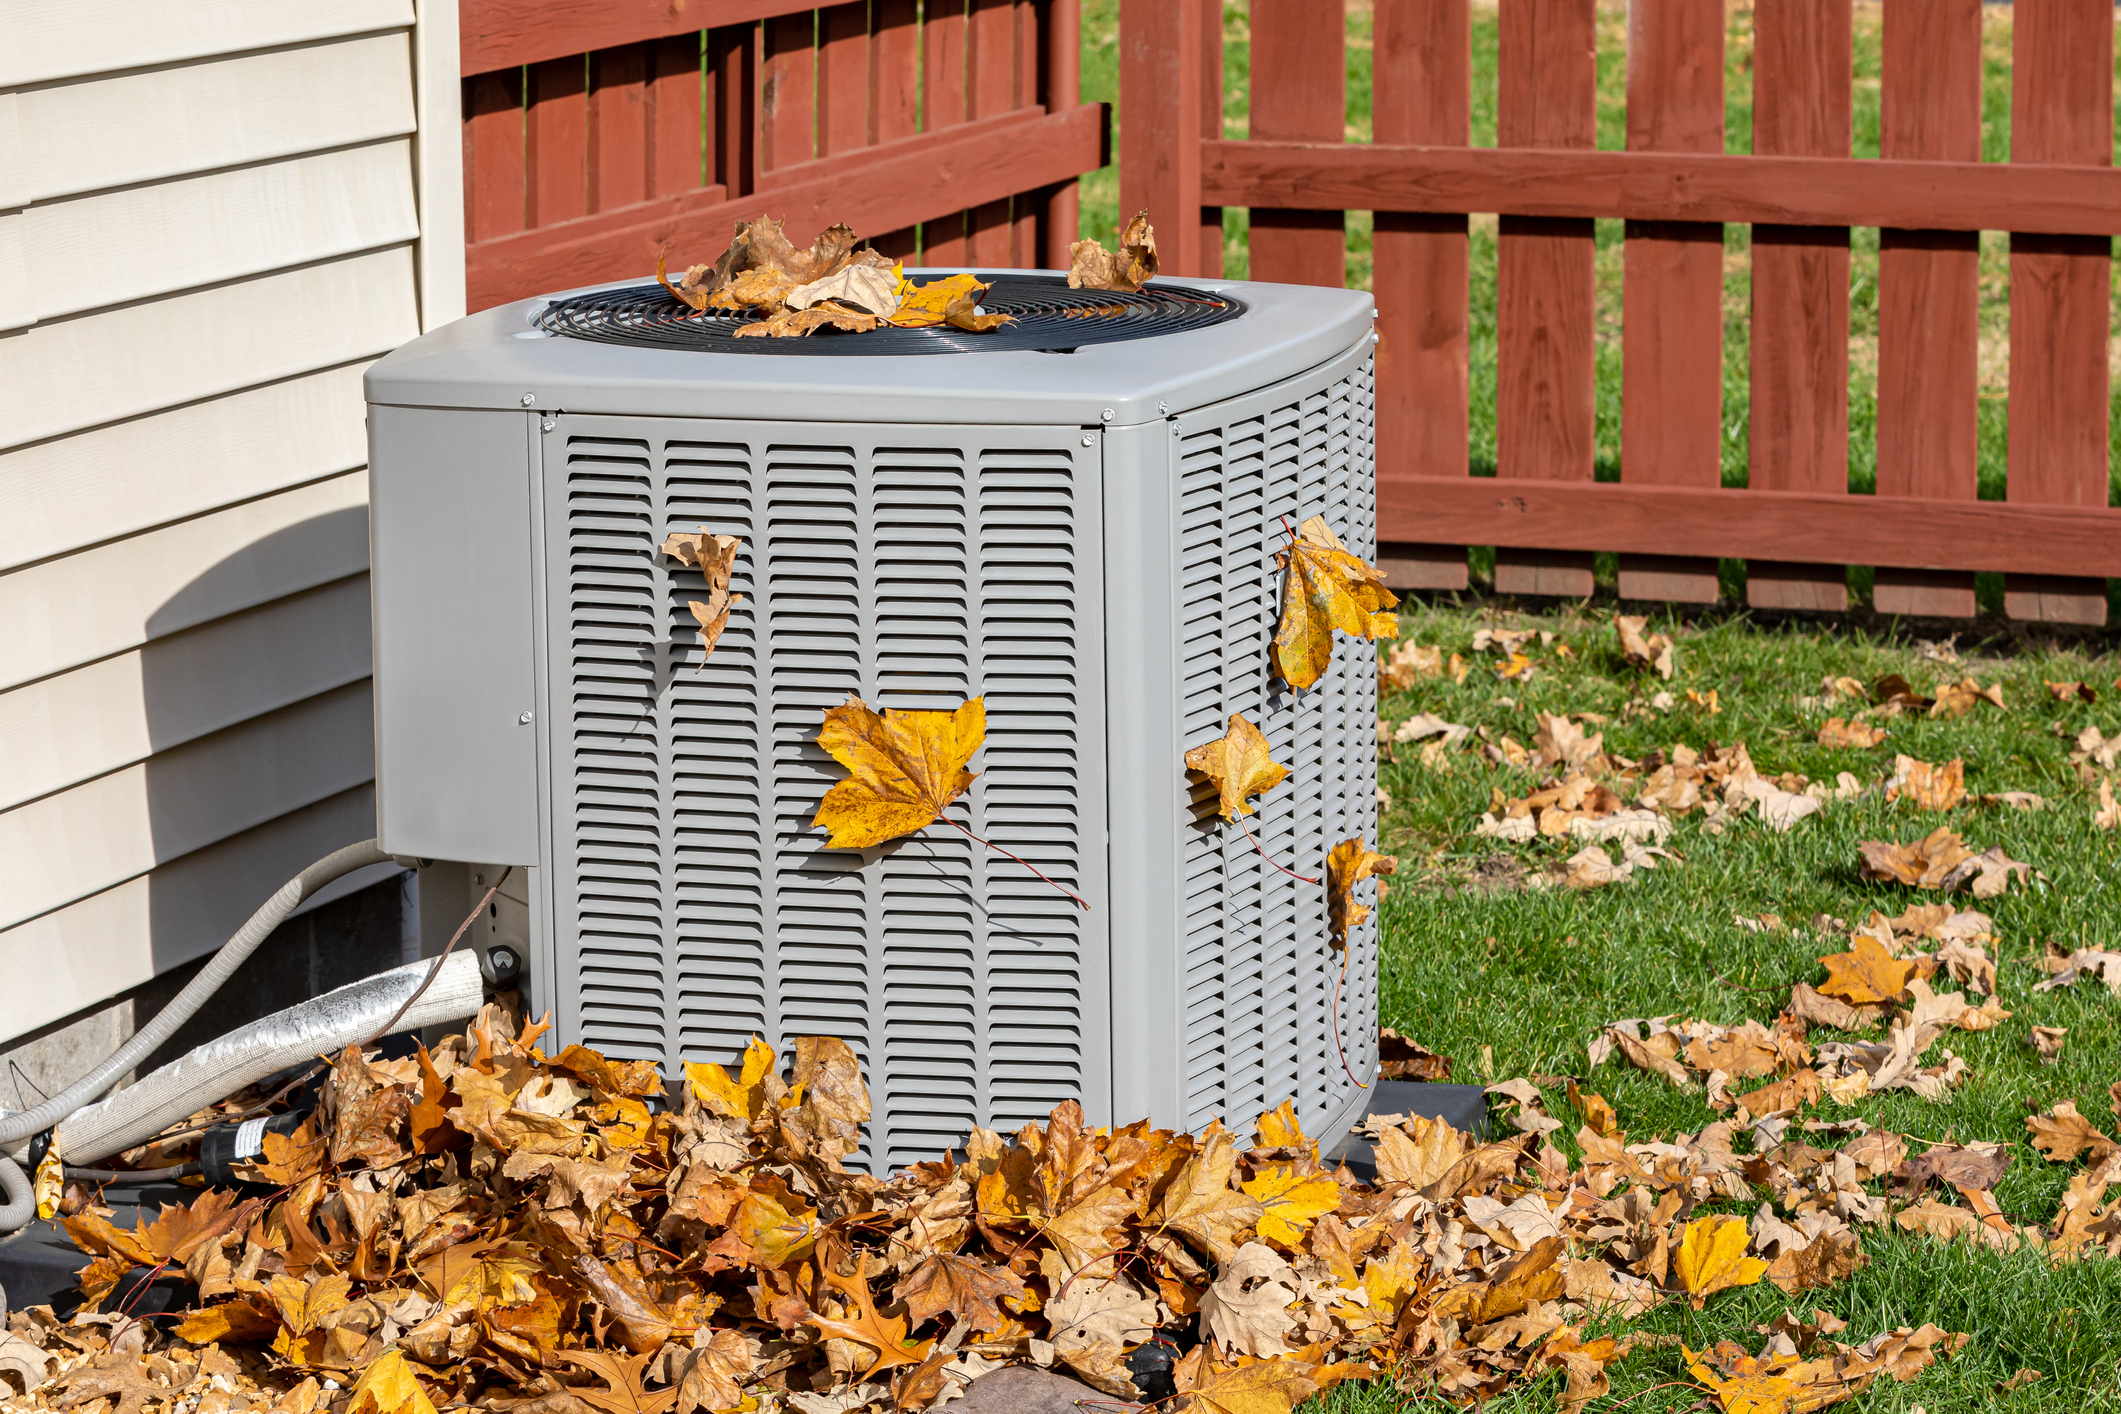 AC condenser unit in backyard of house, surrounded by leaves